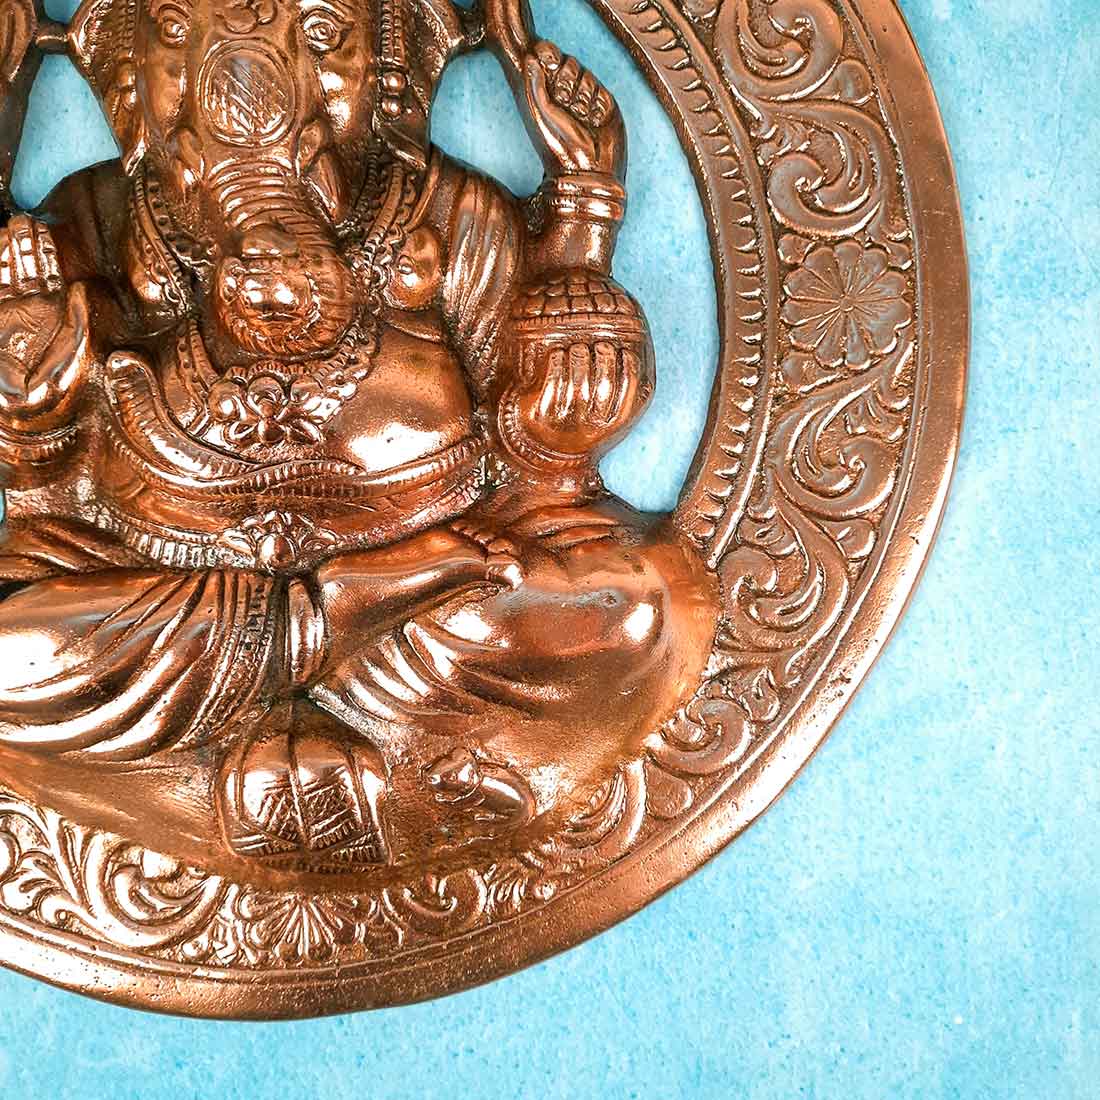 Ganesh Wall Hanging | Ganesha in Blessing Pose - For Home, Wall Decor & Gifts - 14 Inch - Apkamart